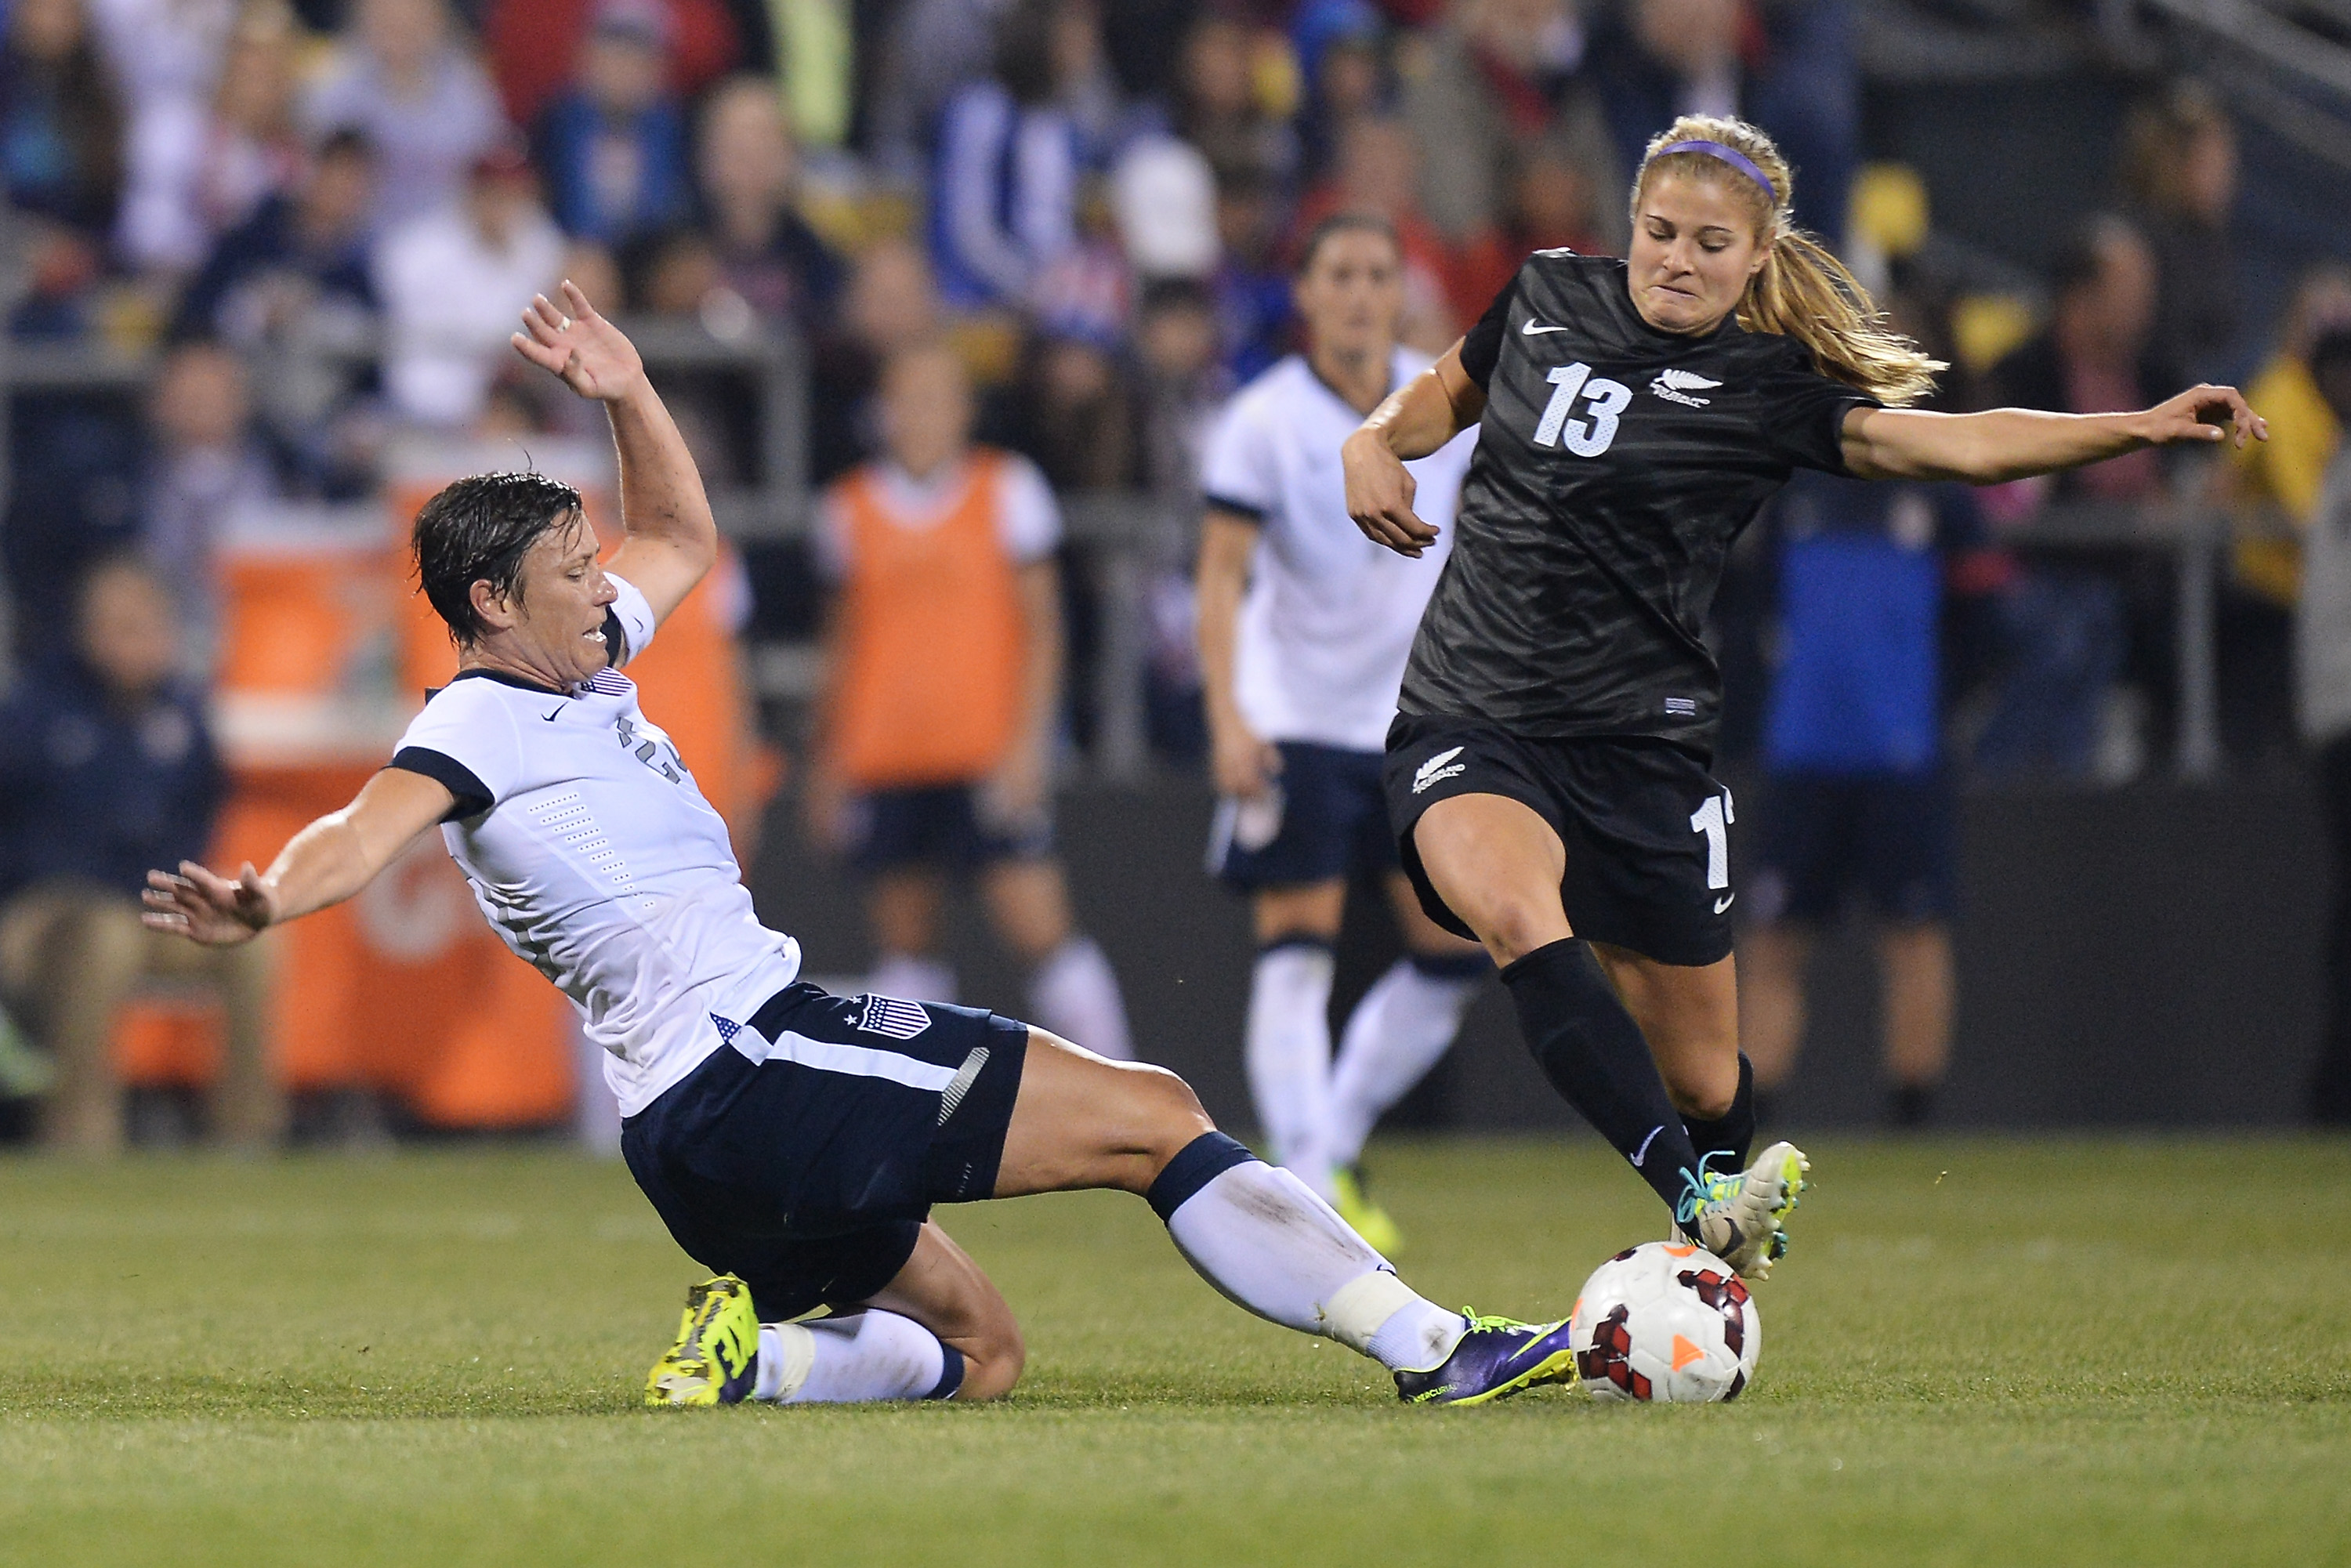 Abby Wambach #20 of the US Women's National Team slides in to attempt to kick the ball away from the control of Rosie White #13 of the New Zealand Women's National Team in the second half at Columbus Crew Stadium on October 30, 2013 in Columbus, Ohio. (Jamie Sabau&mdash;Getty Images)